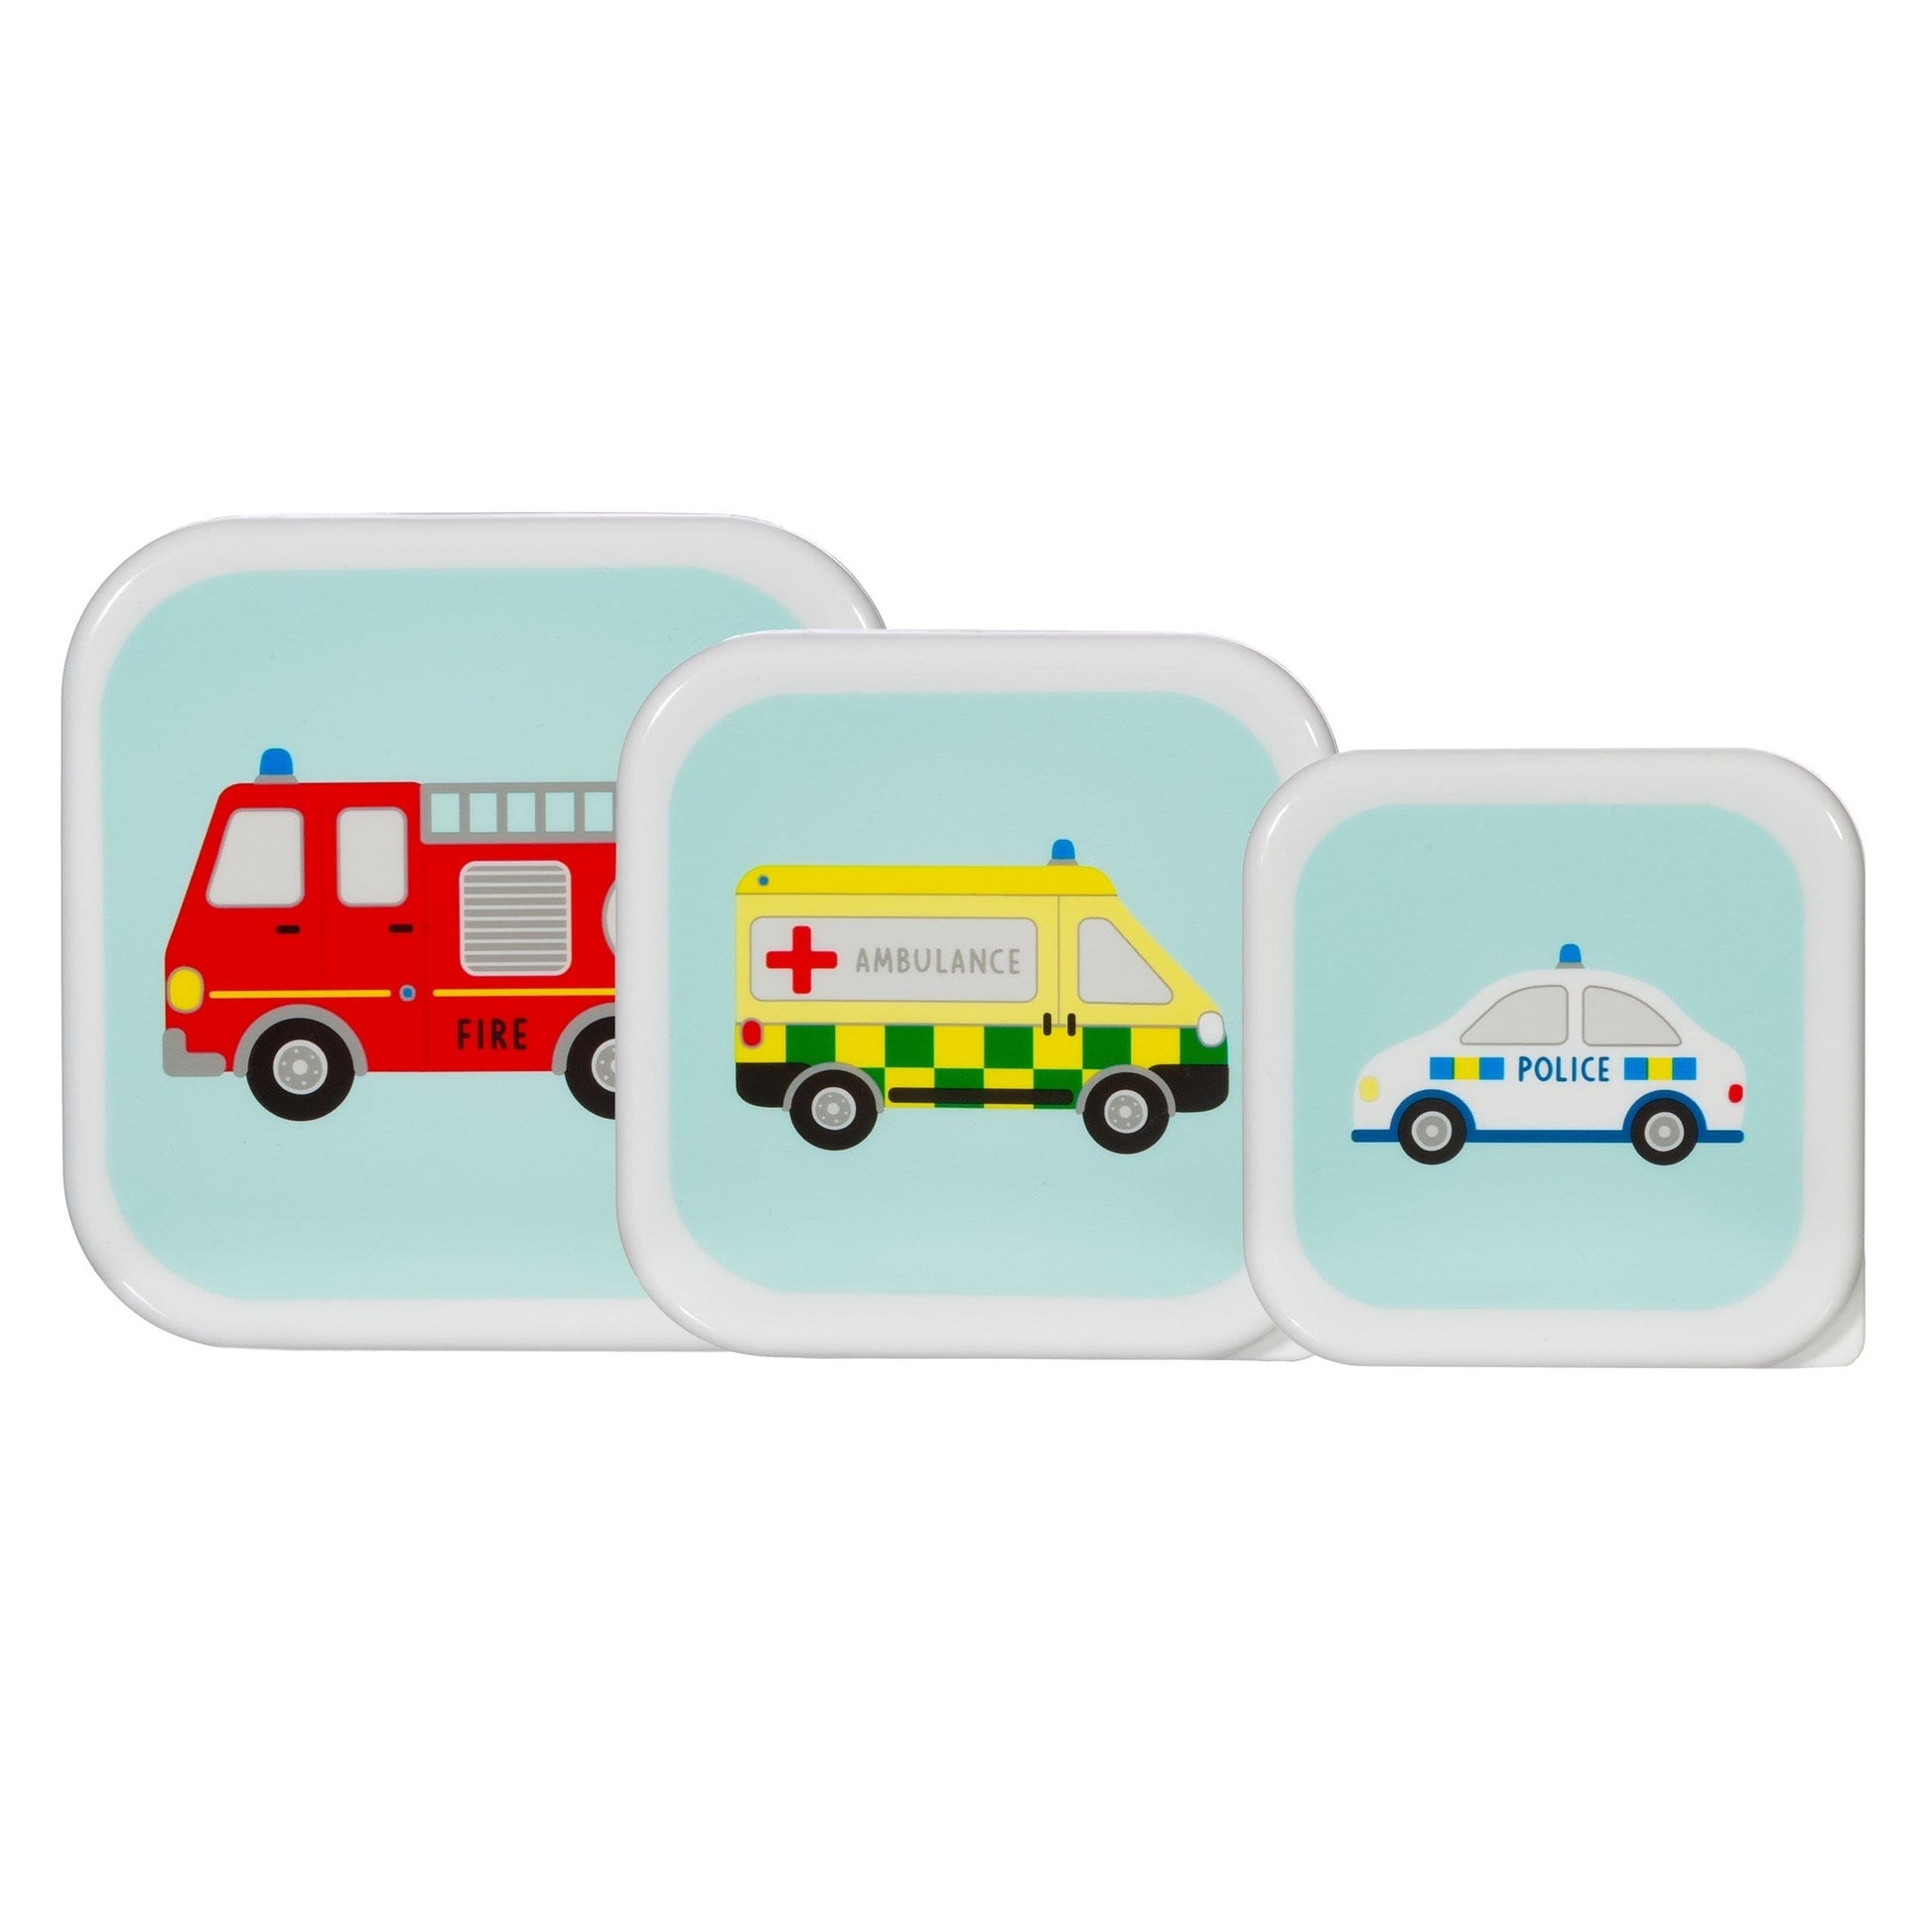 Transport Lunch Boxes - Set Of 3, Fire engine, Ambulance, Police Car - Lunch Boxes by Sass & Belle